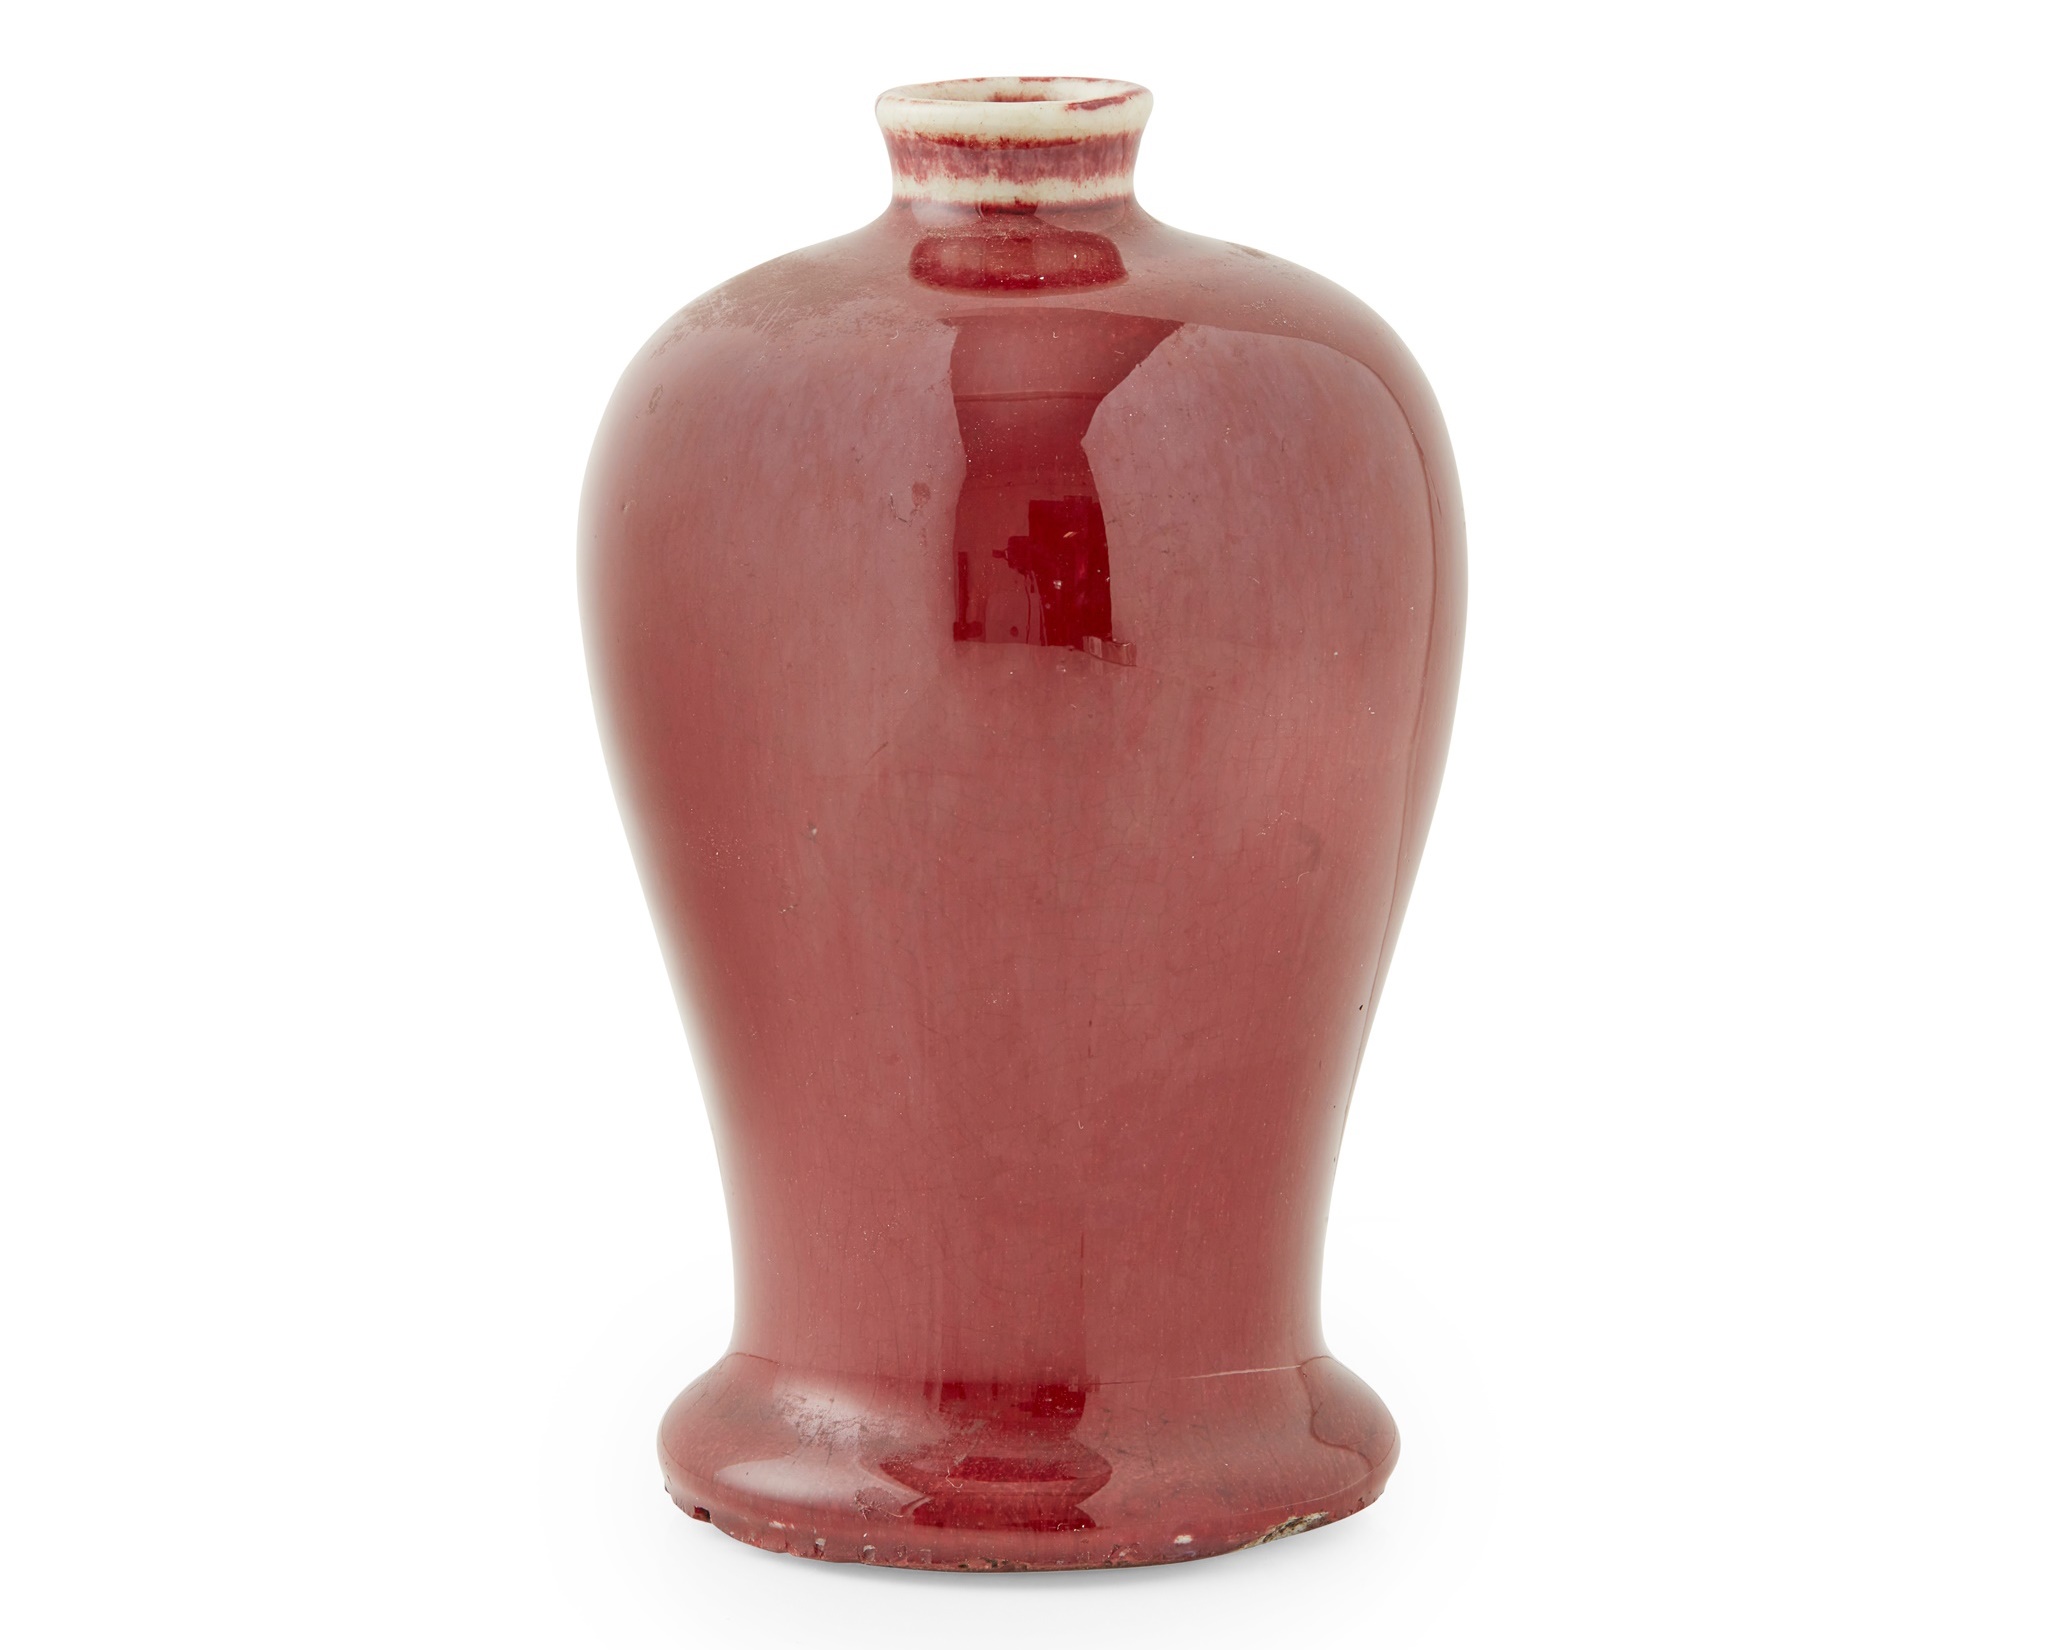 OX-BLOOD-GLAZED LANGYAO MEIPING VASE QING DYNASTY, 18TH-19TH CENTURY